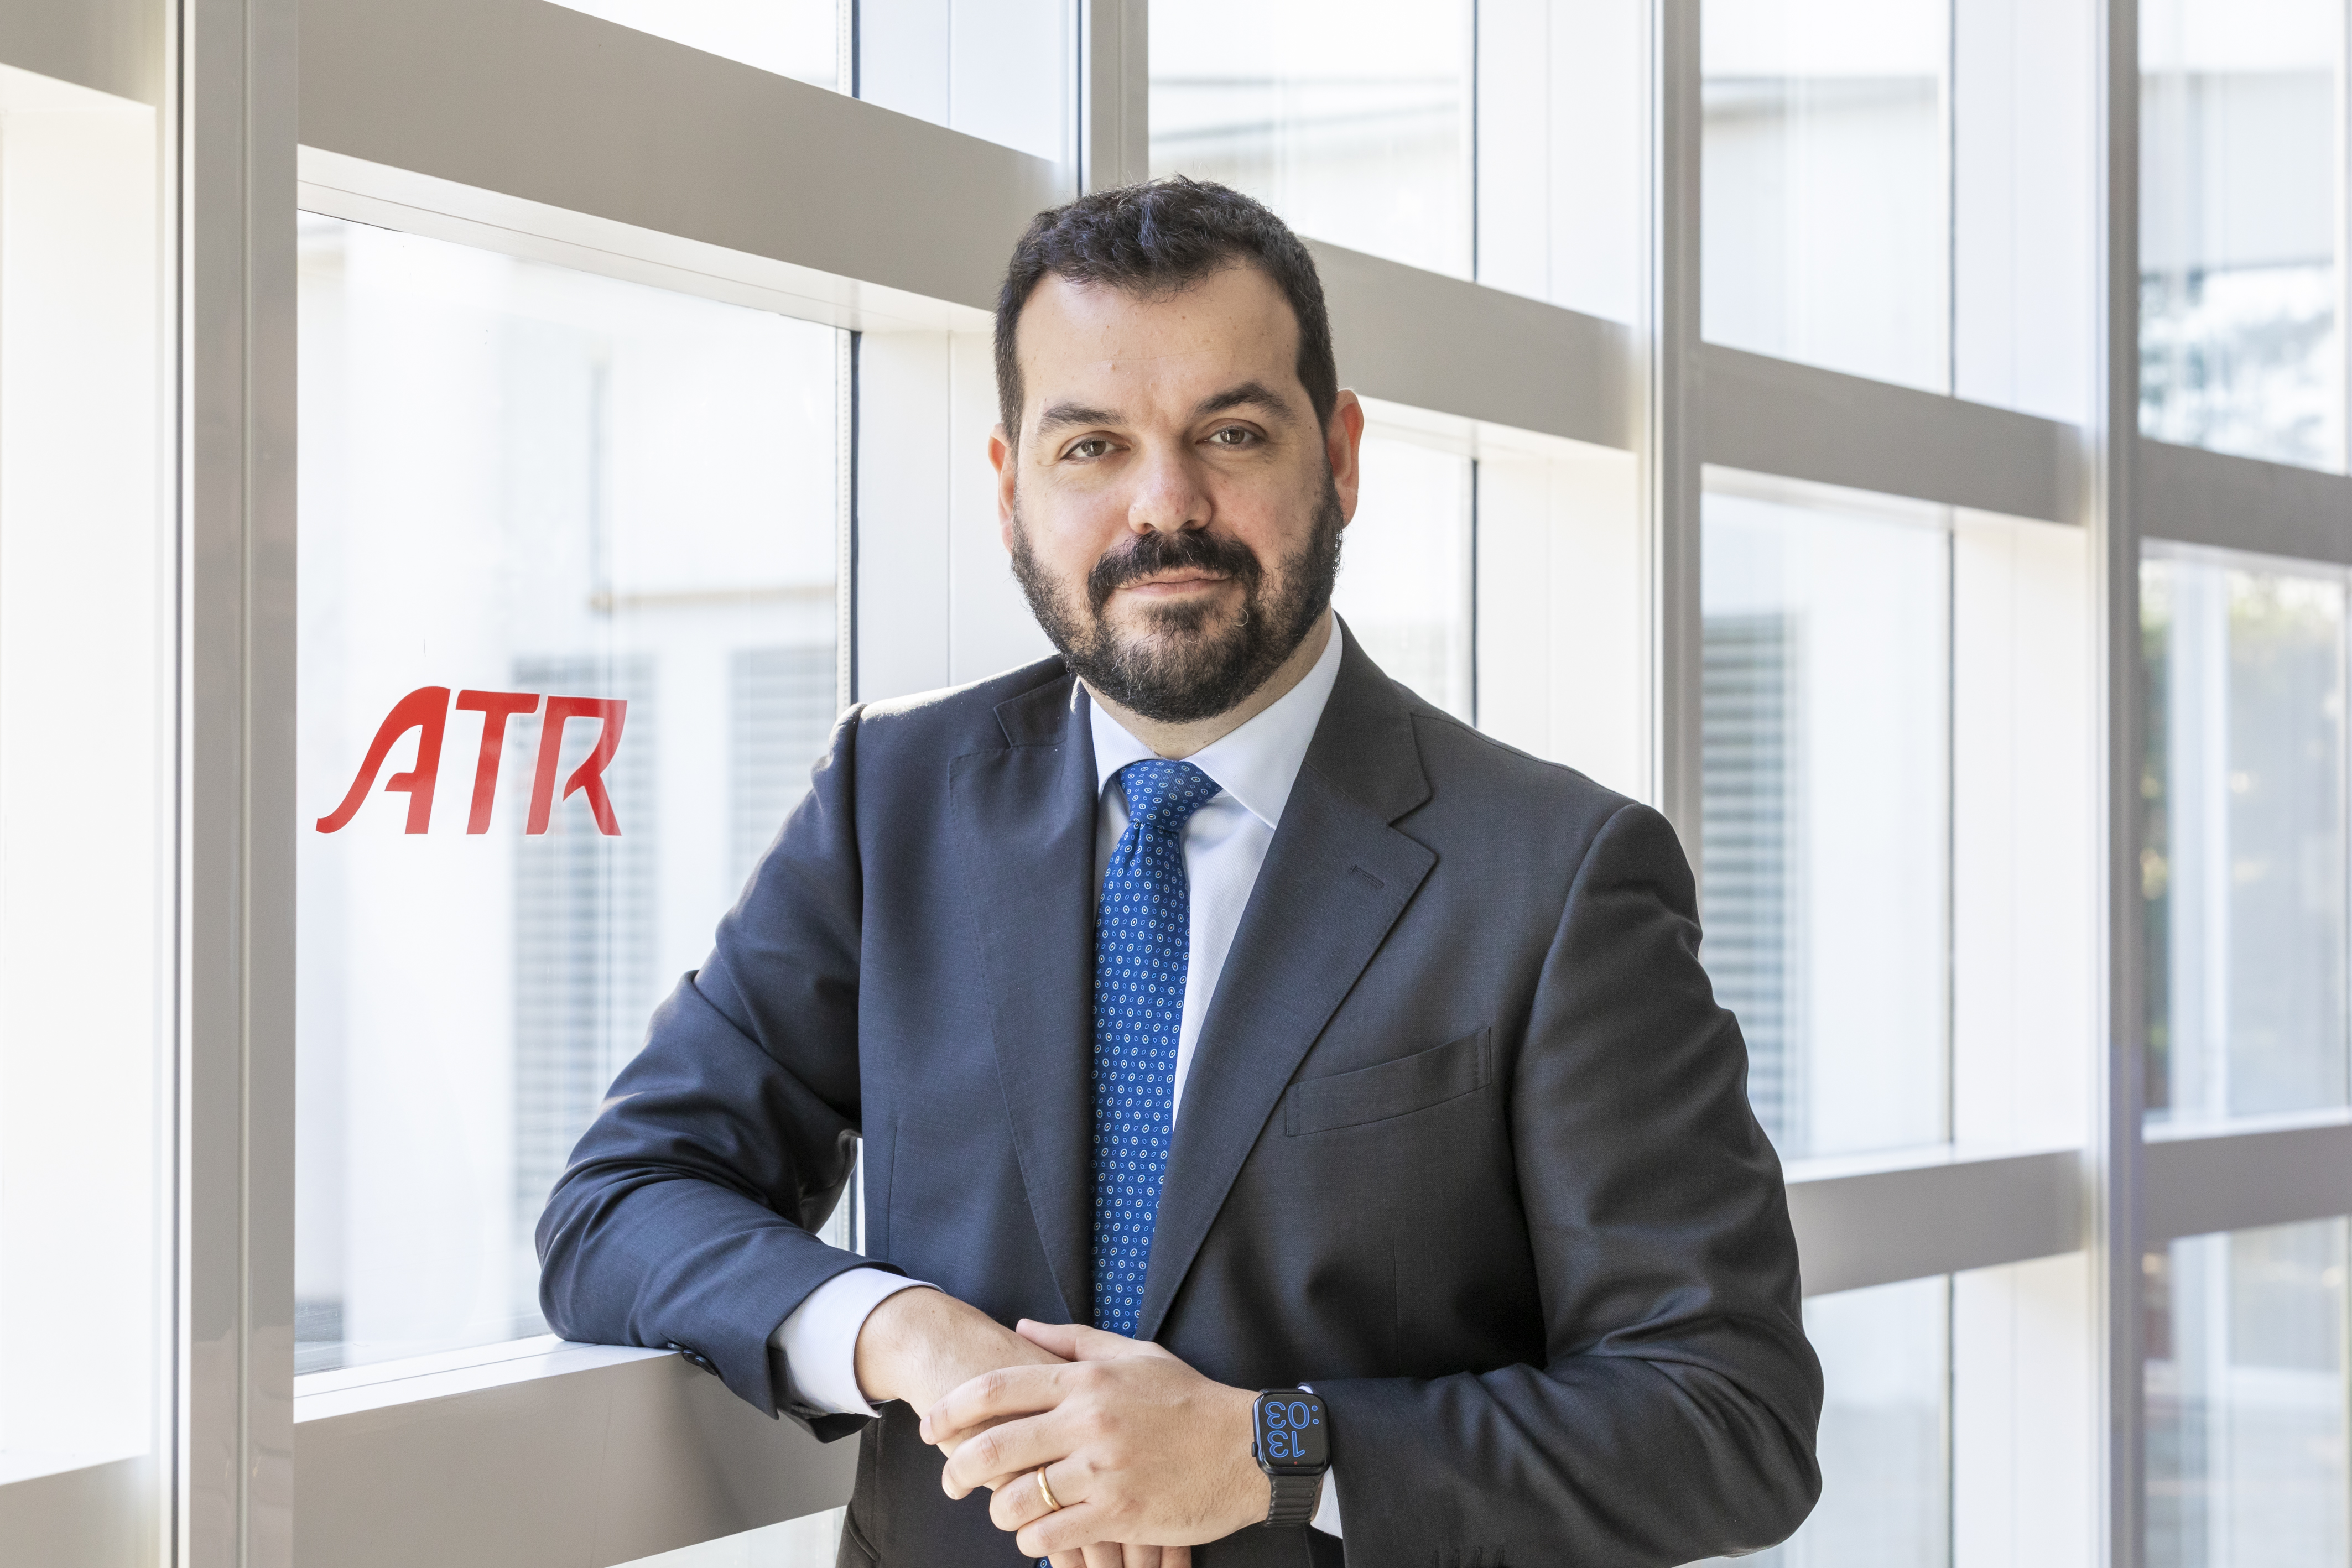 ATR appoints Lamberto Martinello as Head of Communications and Corporate Branding